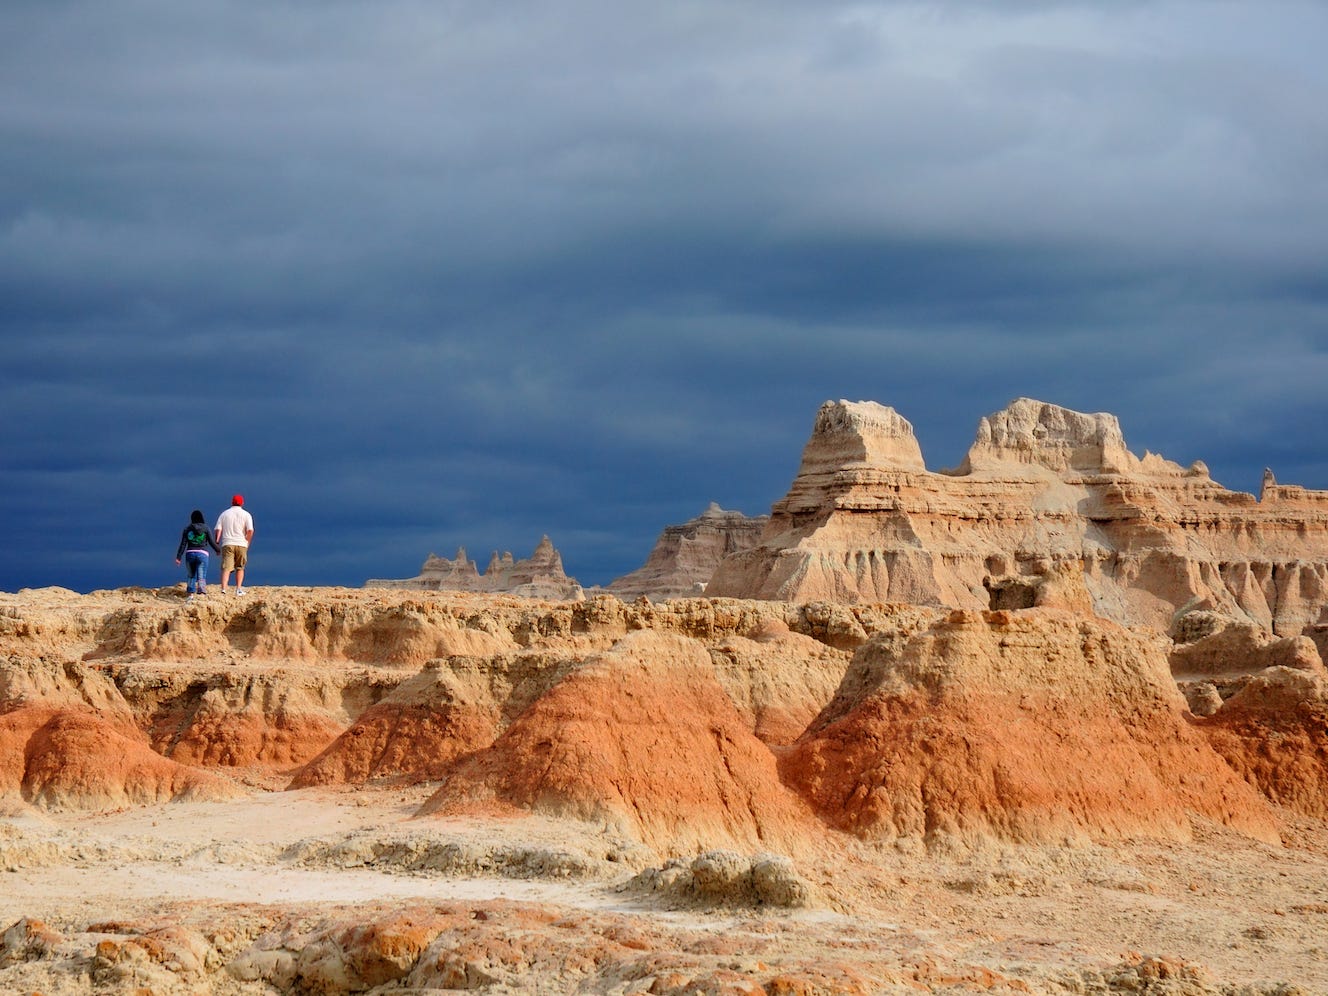 <p>The Badlands' otherworldly rock formations and fossil beds stretch for <a href="https://www.nps.gov/badl/index.htm">244,000 acres.</a></p>